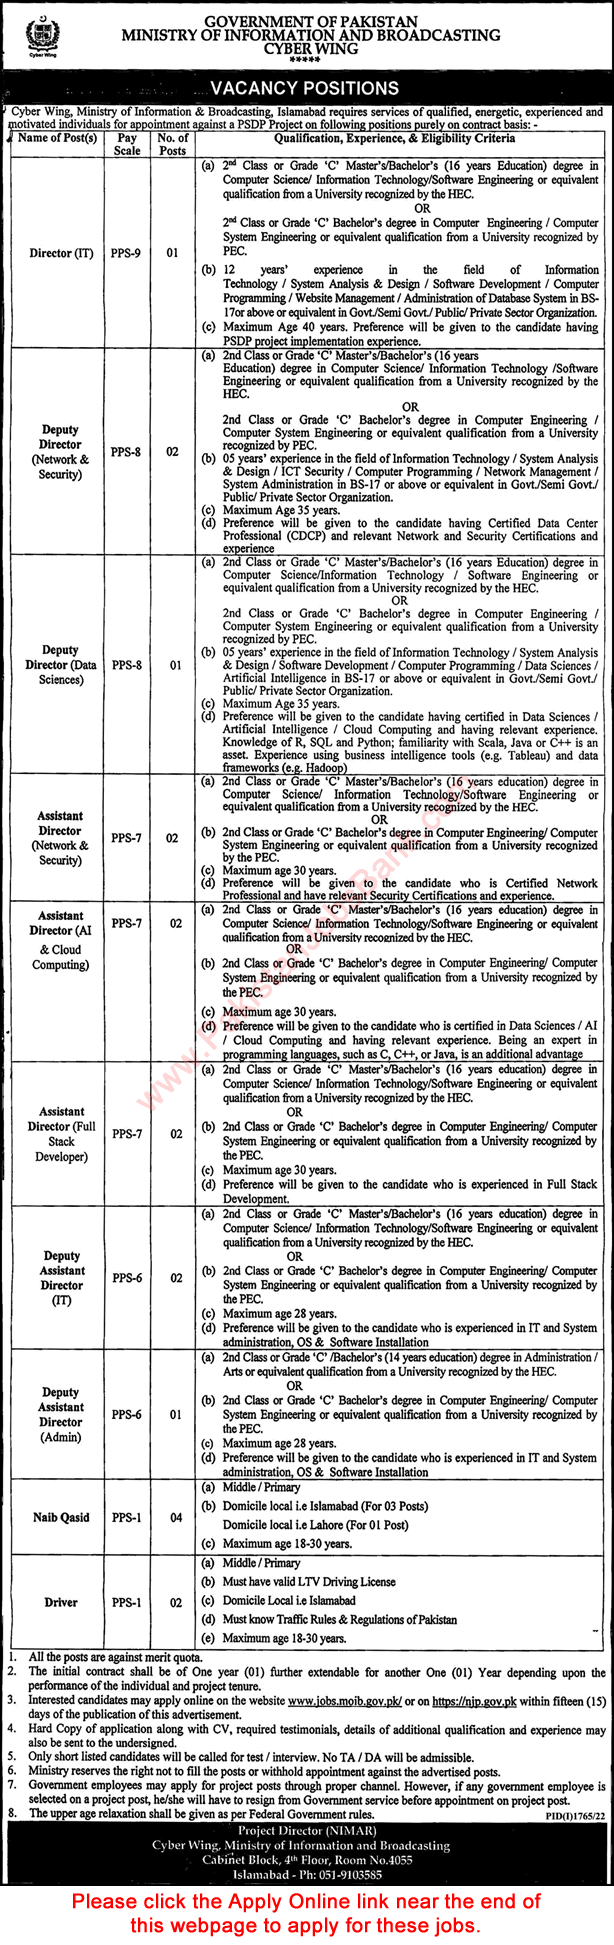 Ministry of Information and Broadcasting Jobs 2022 September Apply Online Assistant Directors & Others Latest